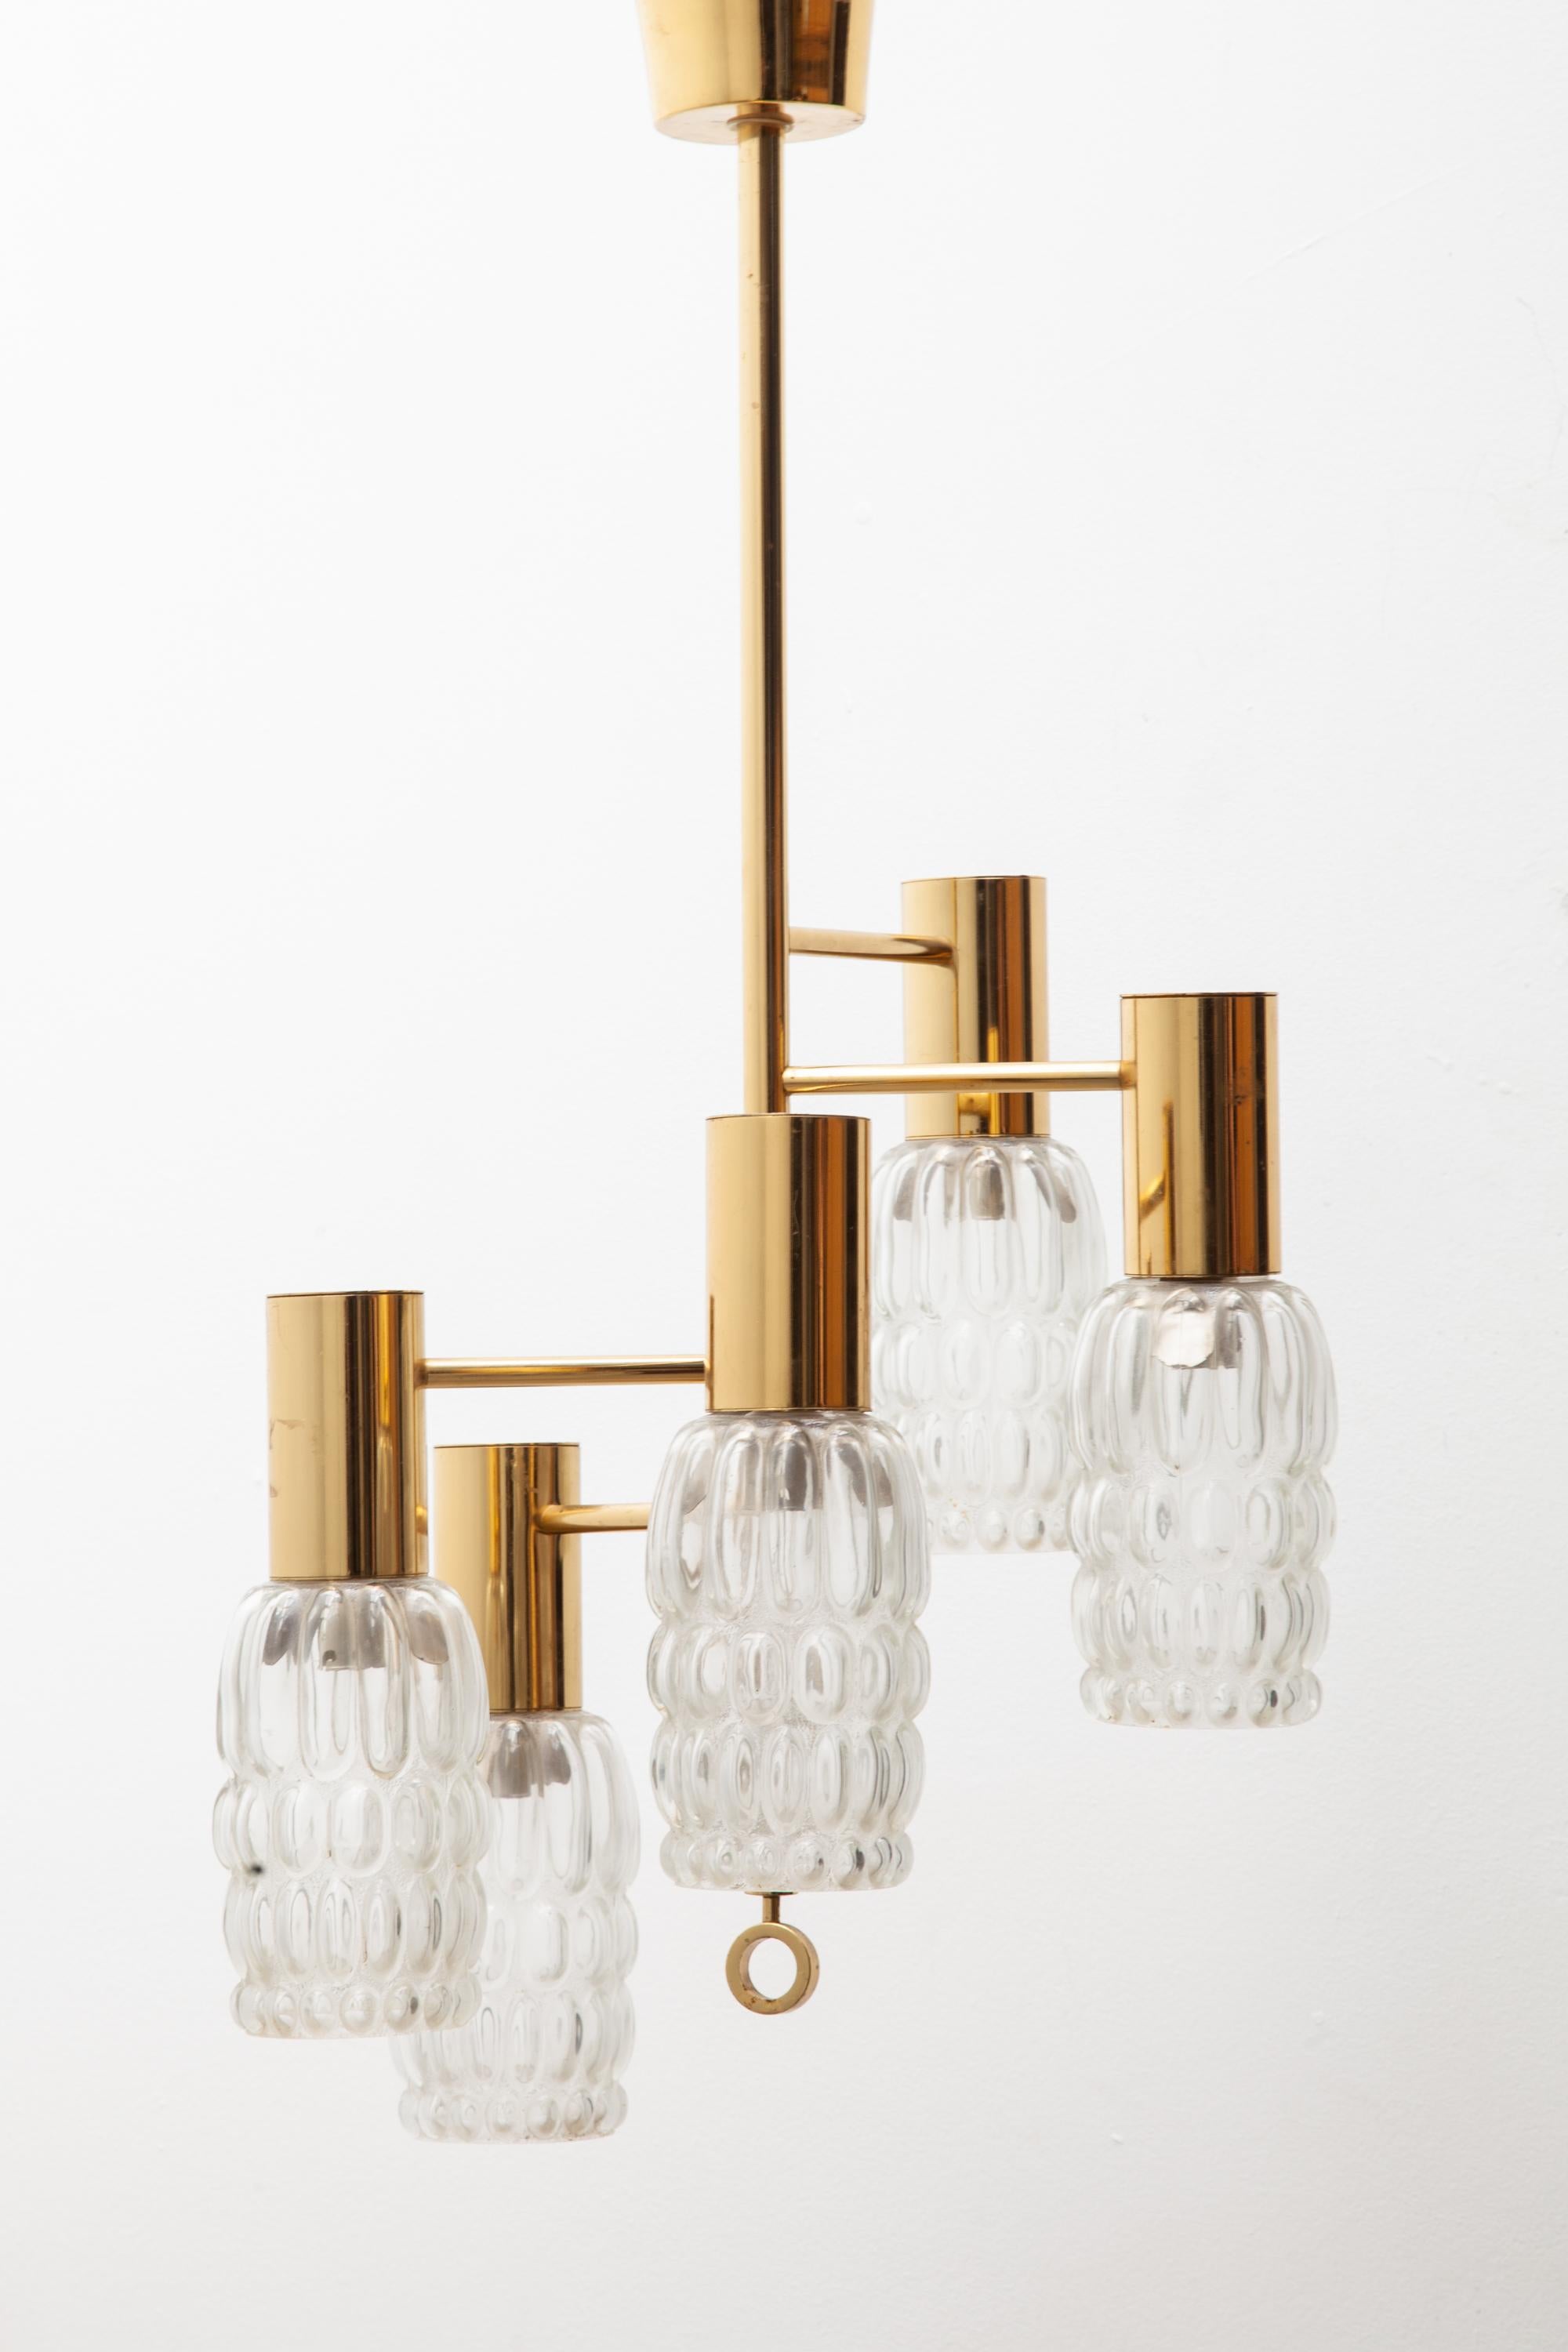 A beautiful polished brass pendant light fixture by Helena Tynell for Glashütte Limburg, Germany.
Five clear bubble glass lamp shades hang on polished brass arms.
Very good original condition.